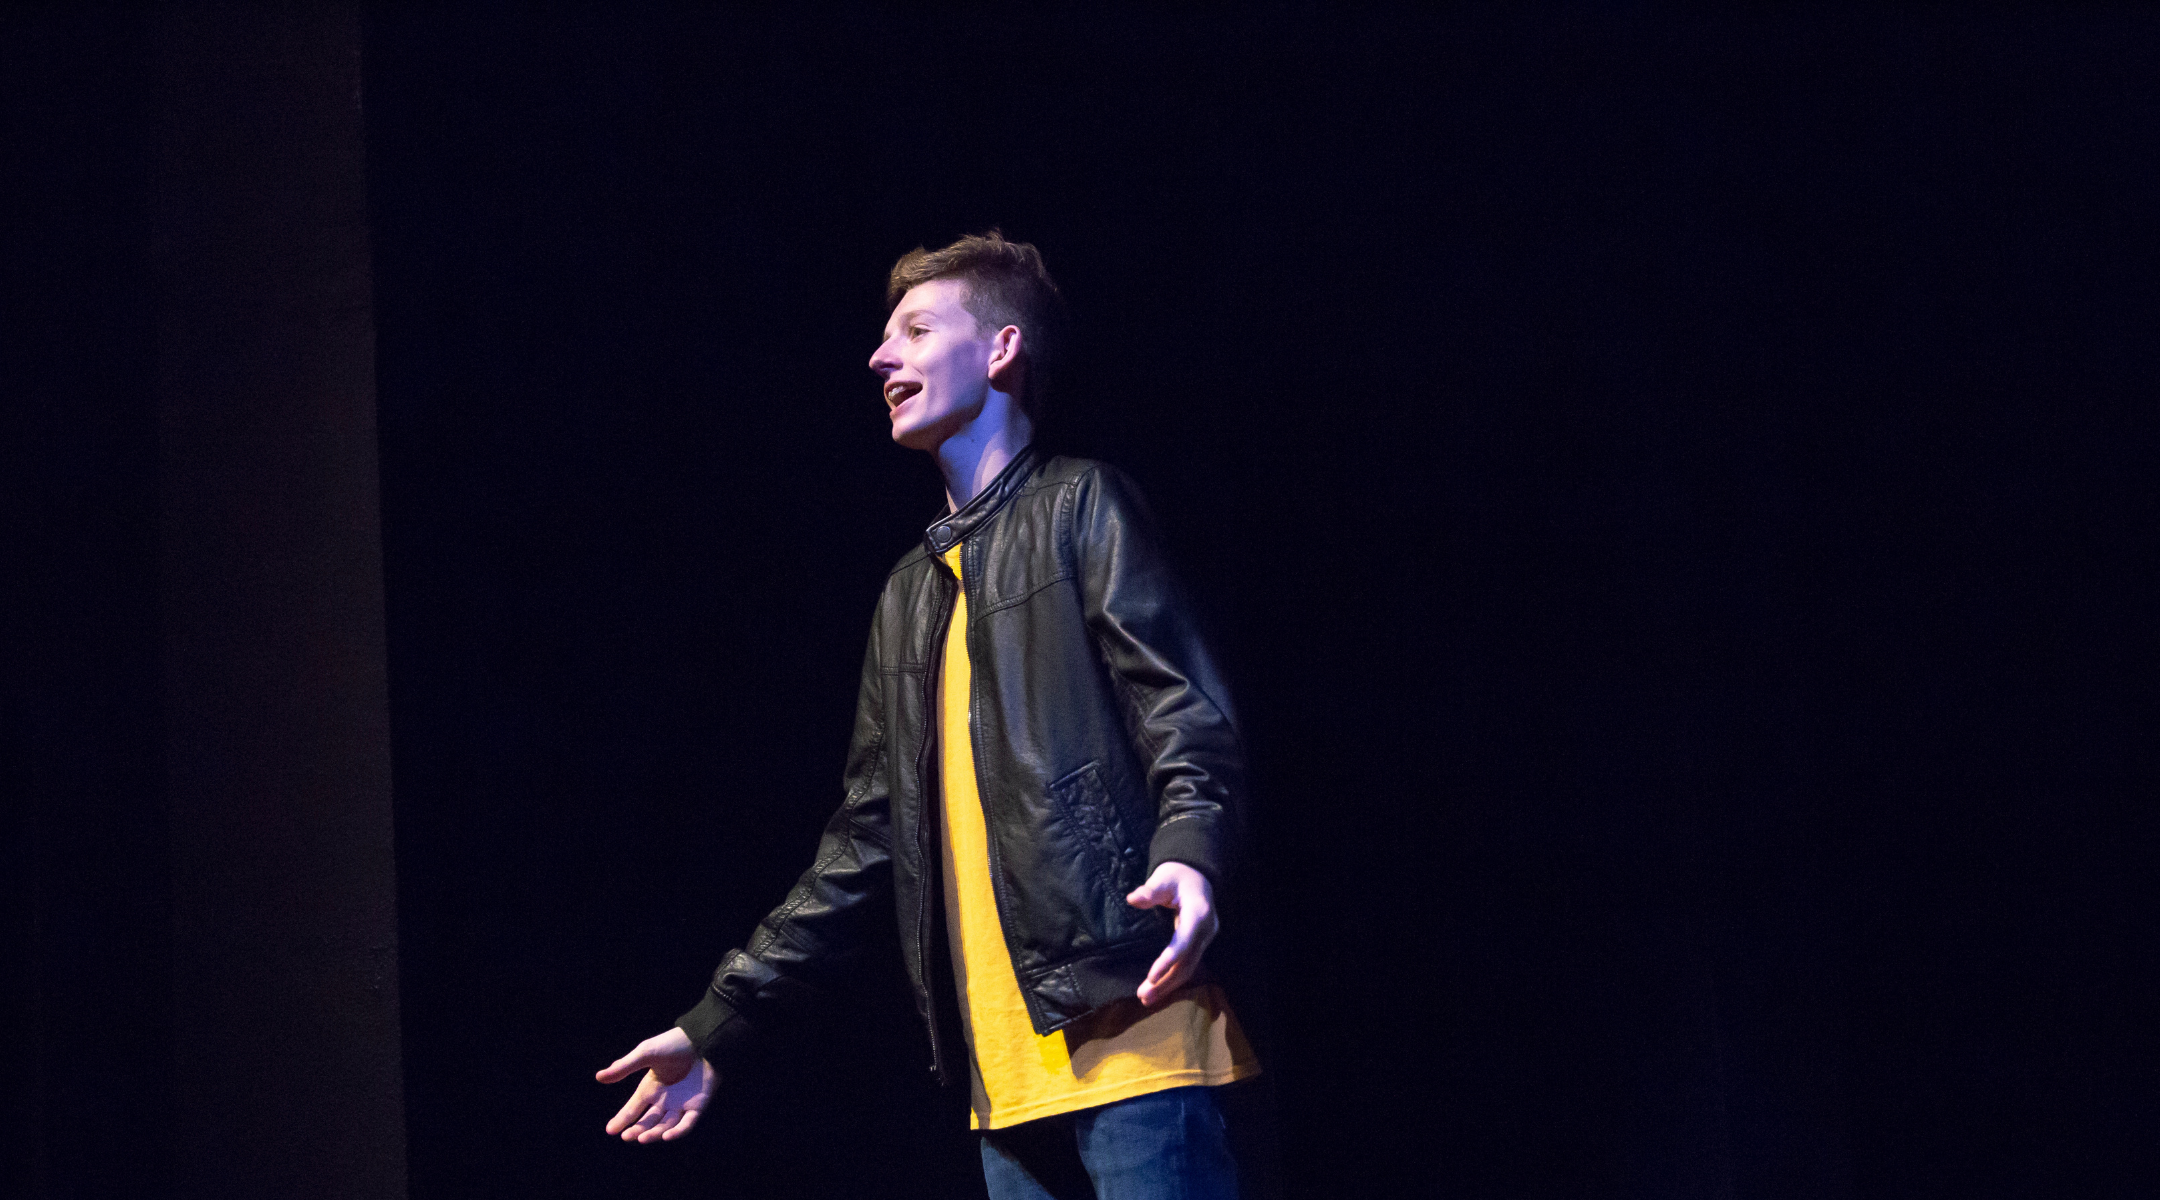 student wearing black leather jacked and yellow shirt singing on stage